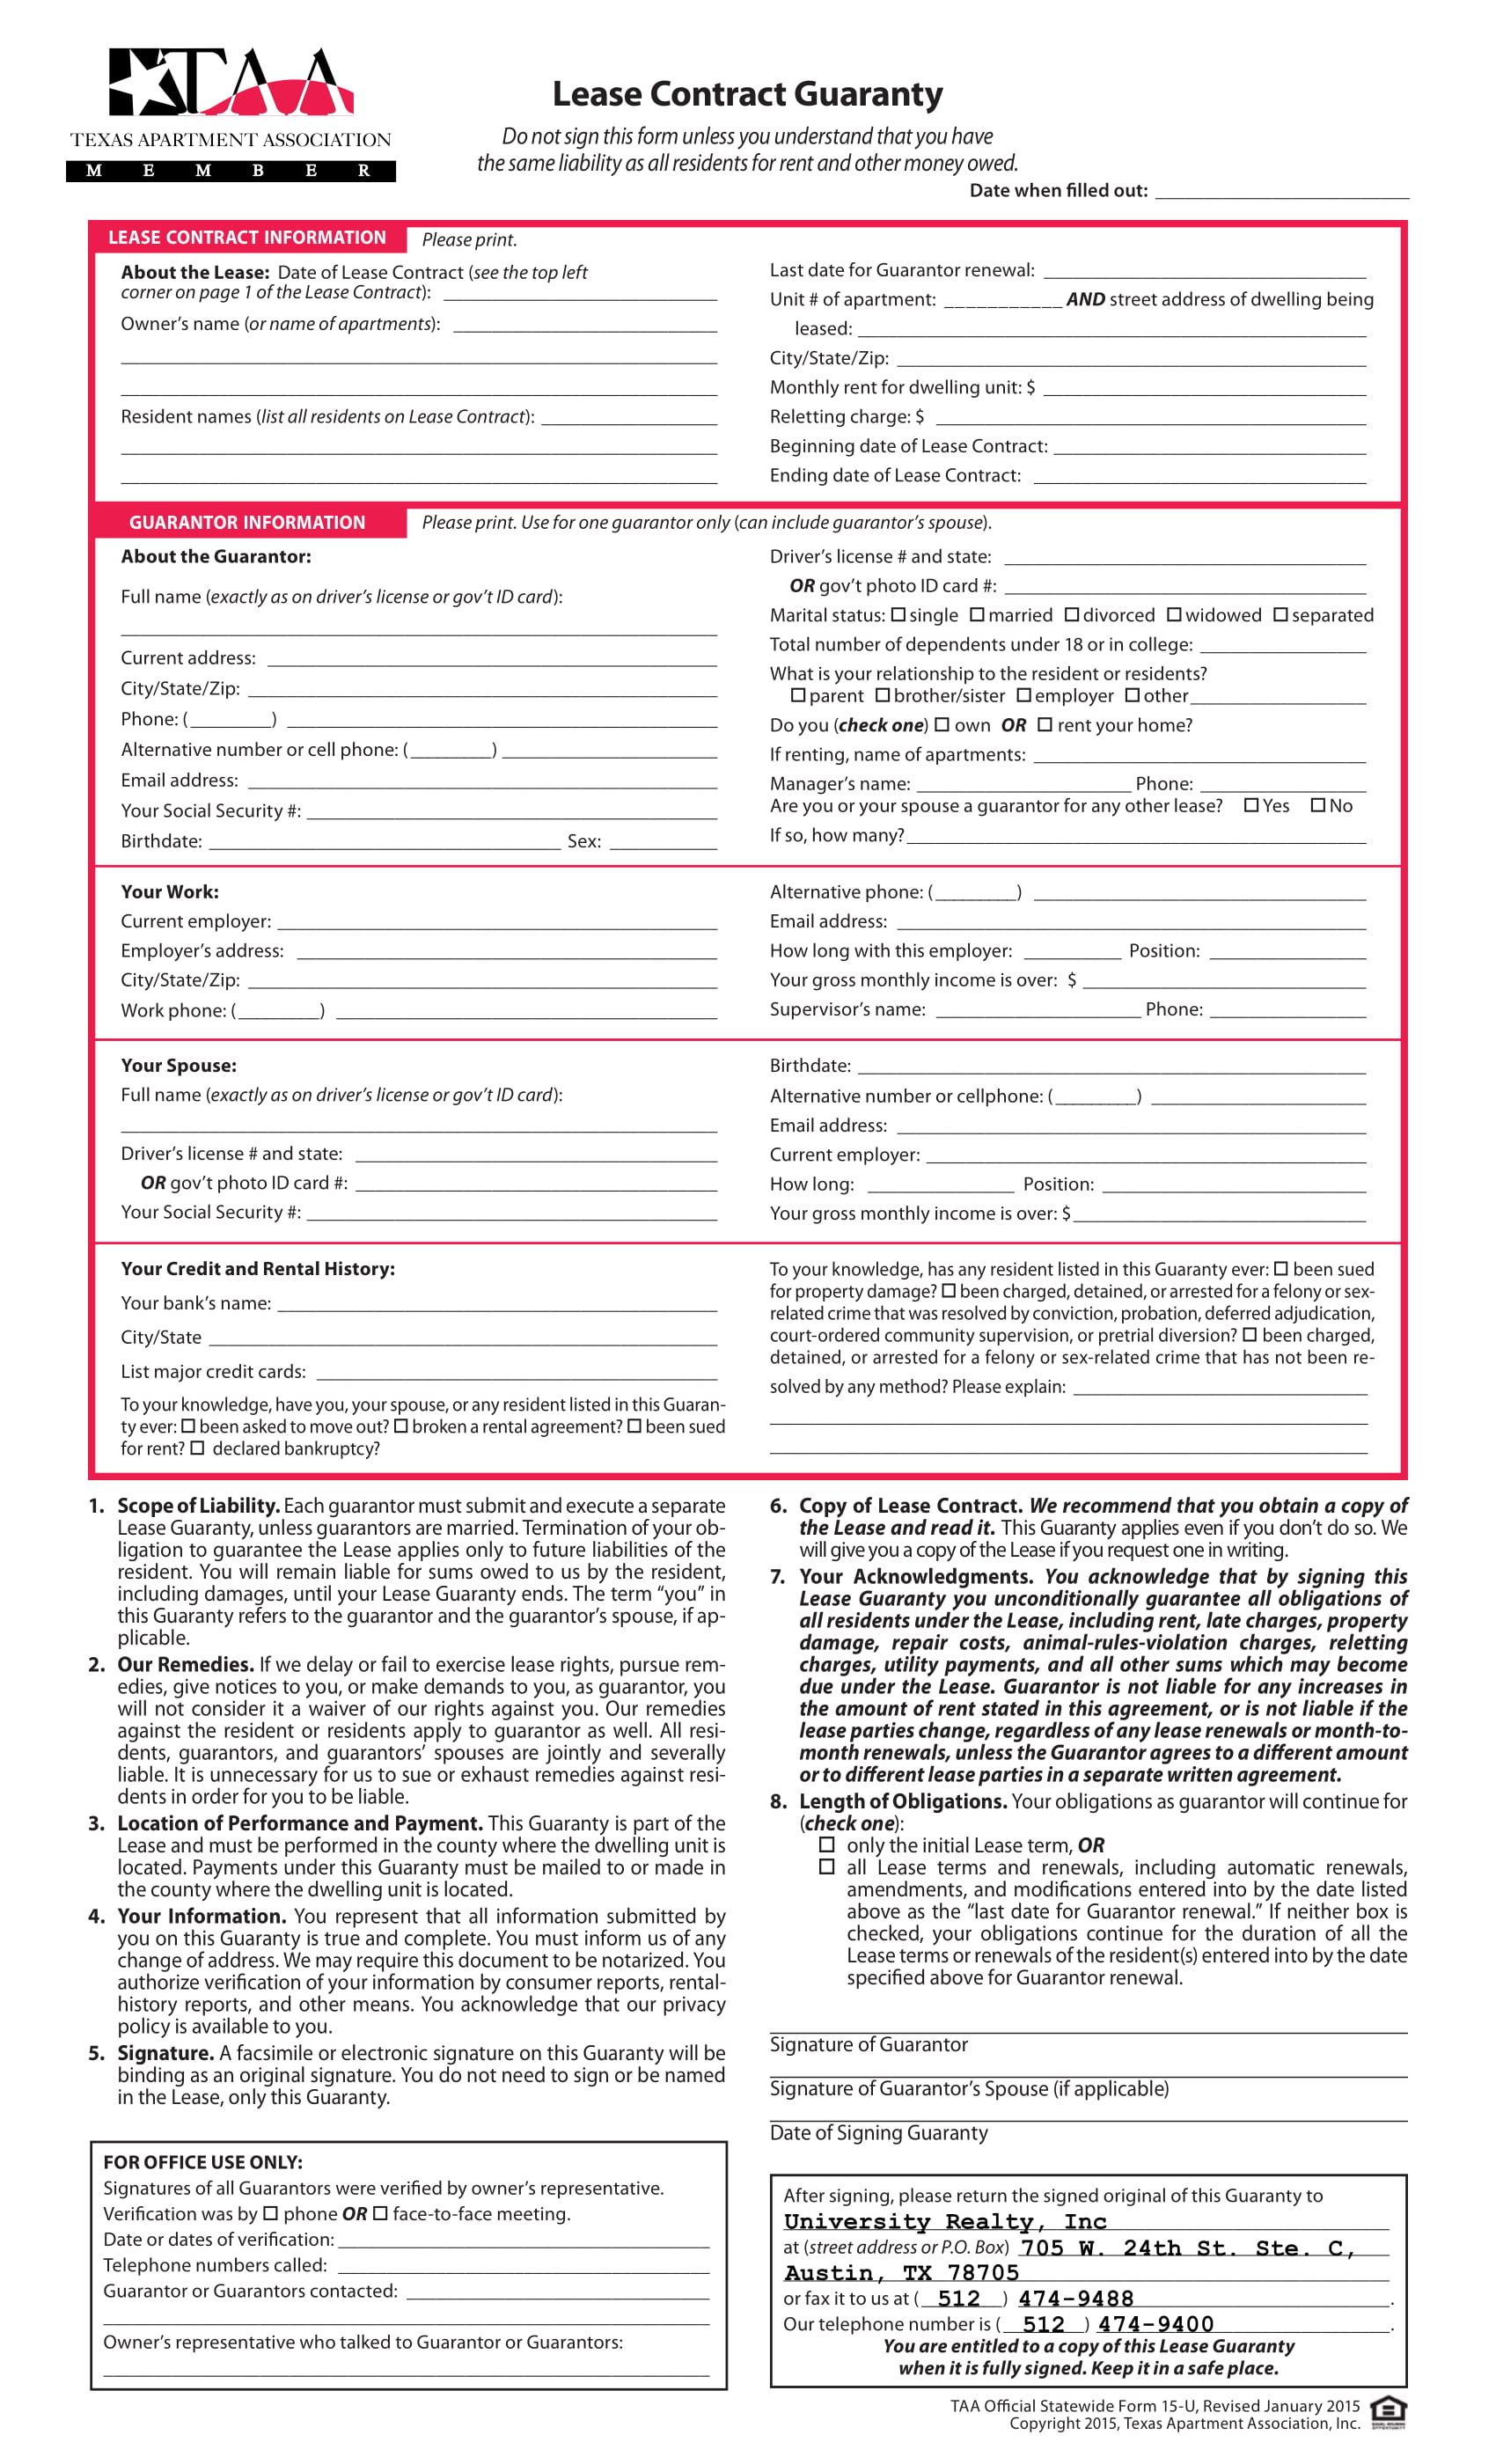 lease contract guaranty form 1